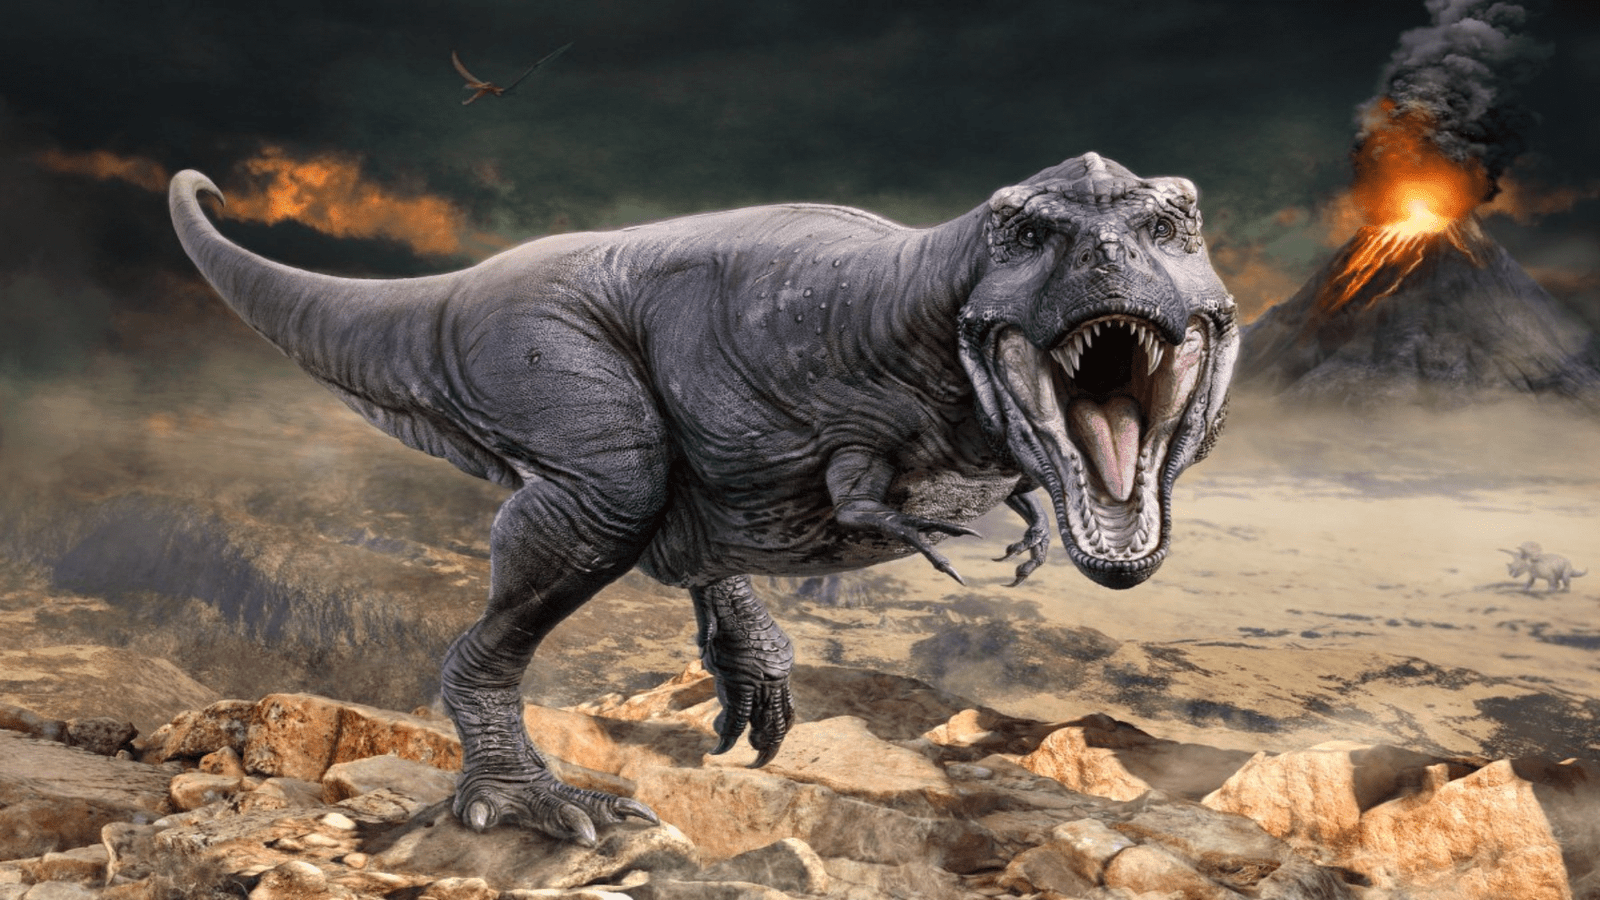 Dinosaurs became warm-blooded 180 m years ago: study